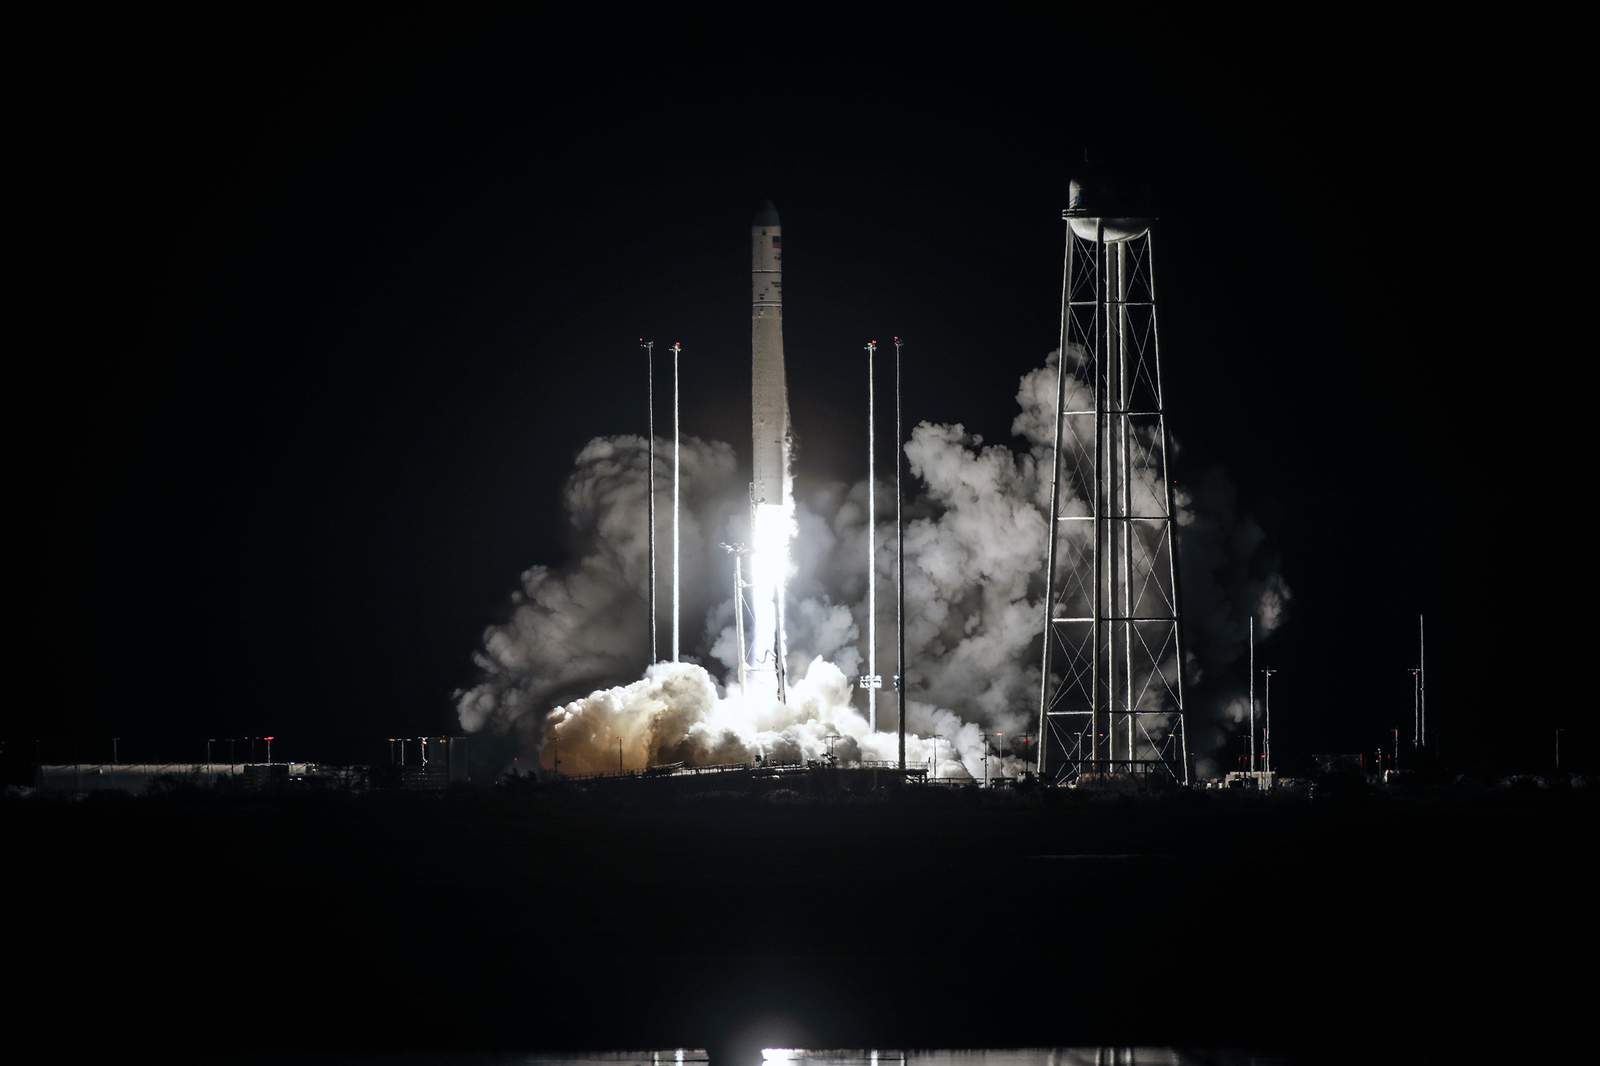 Virginia spaceport launches nearly 8,000 pounds of supplies to International Space Station